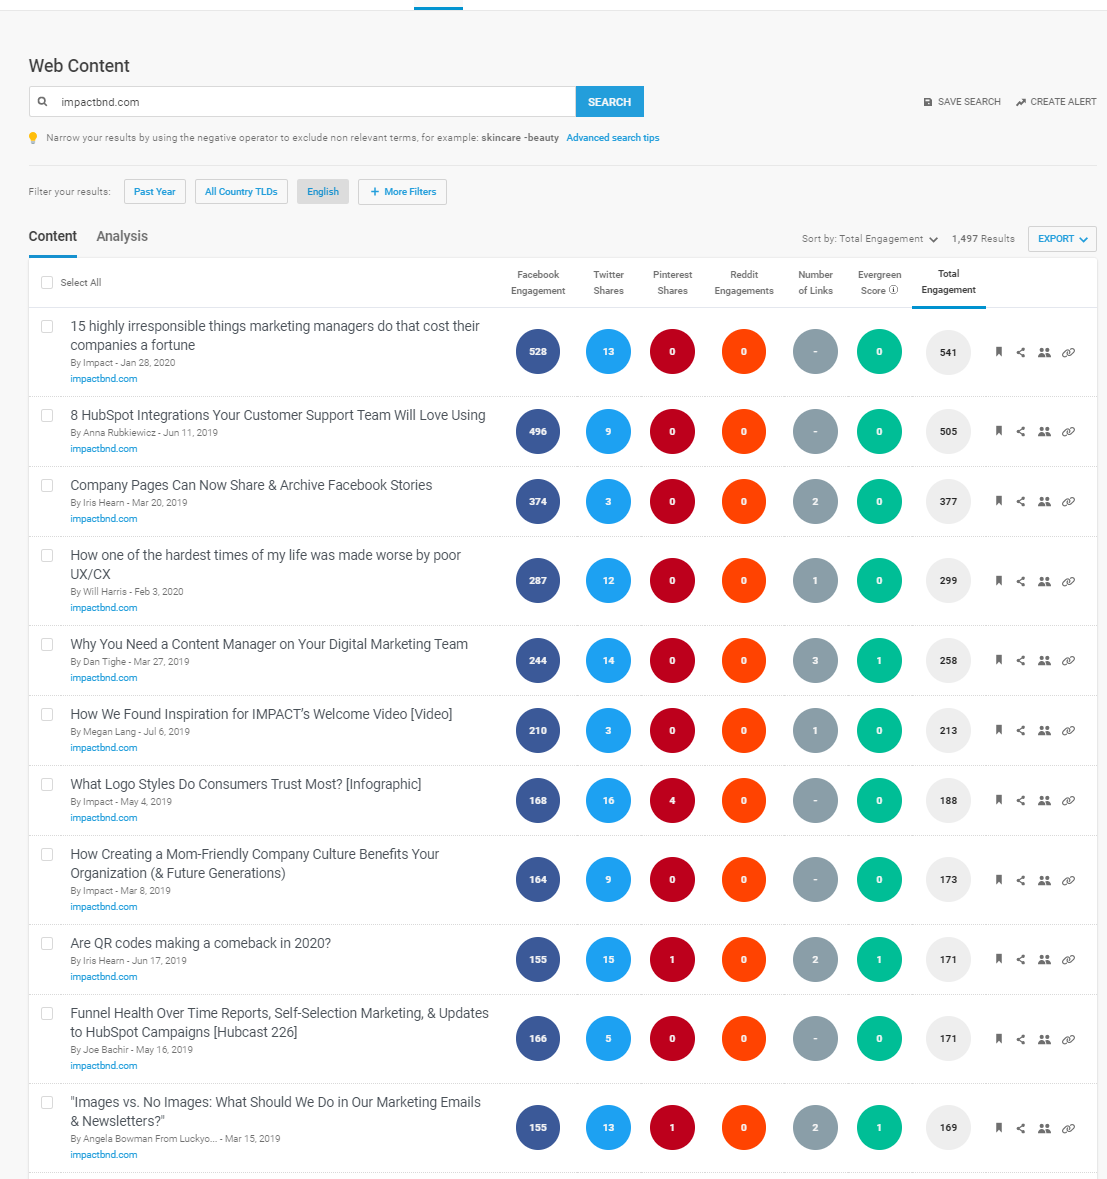 Top Shared Content BuzzSumo Impact Bend